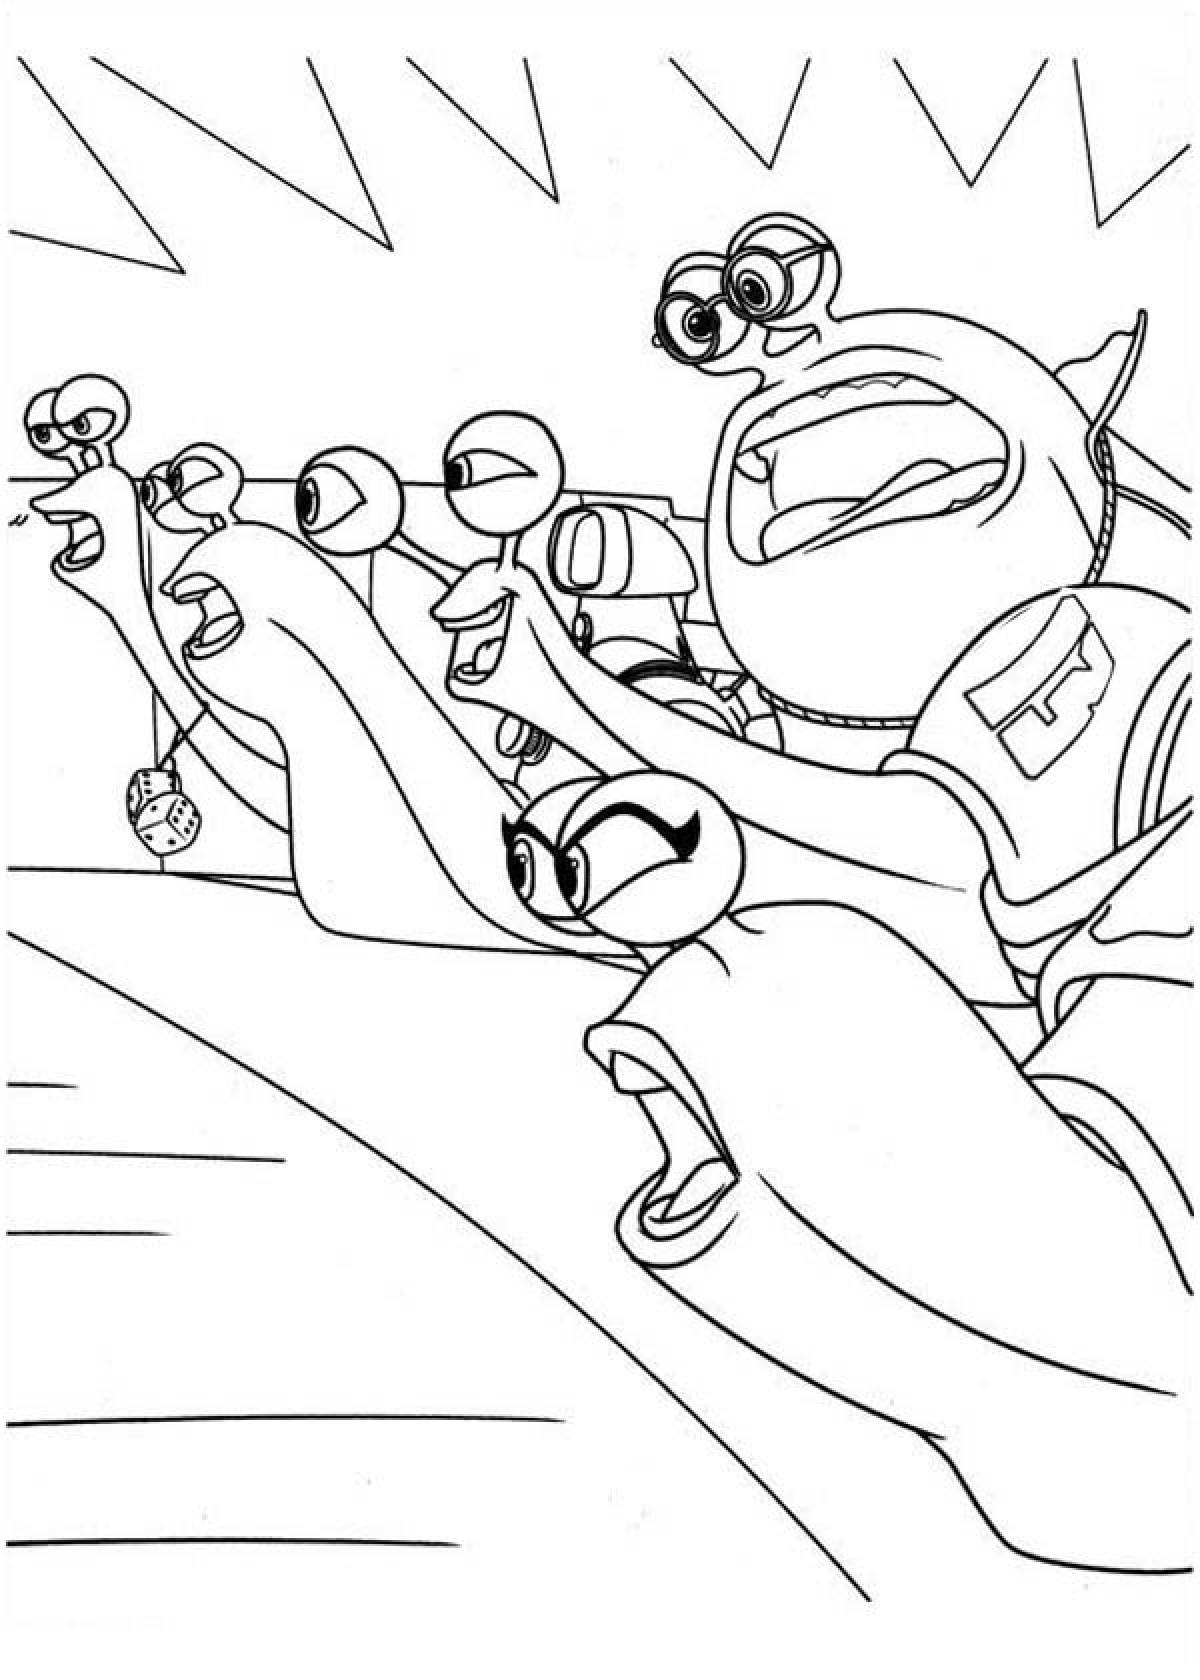 Turbo cartoon coloring pages